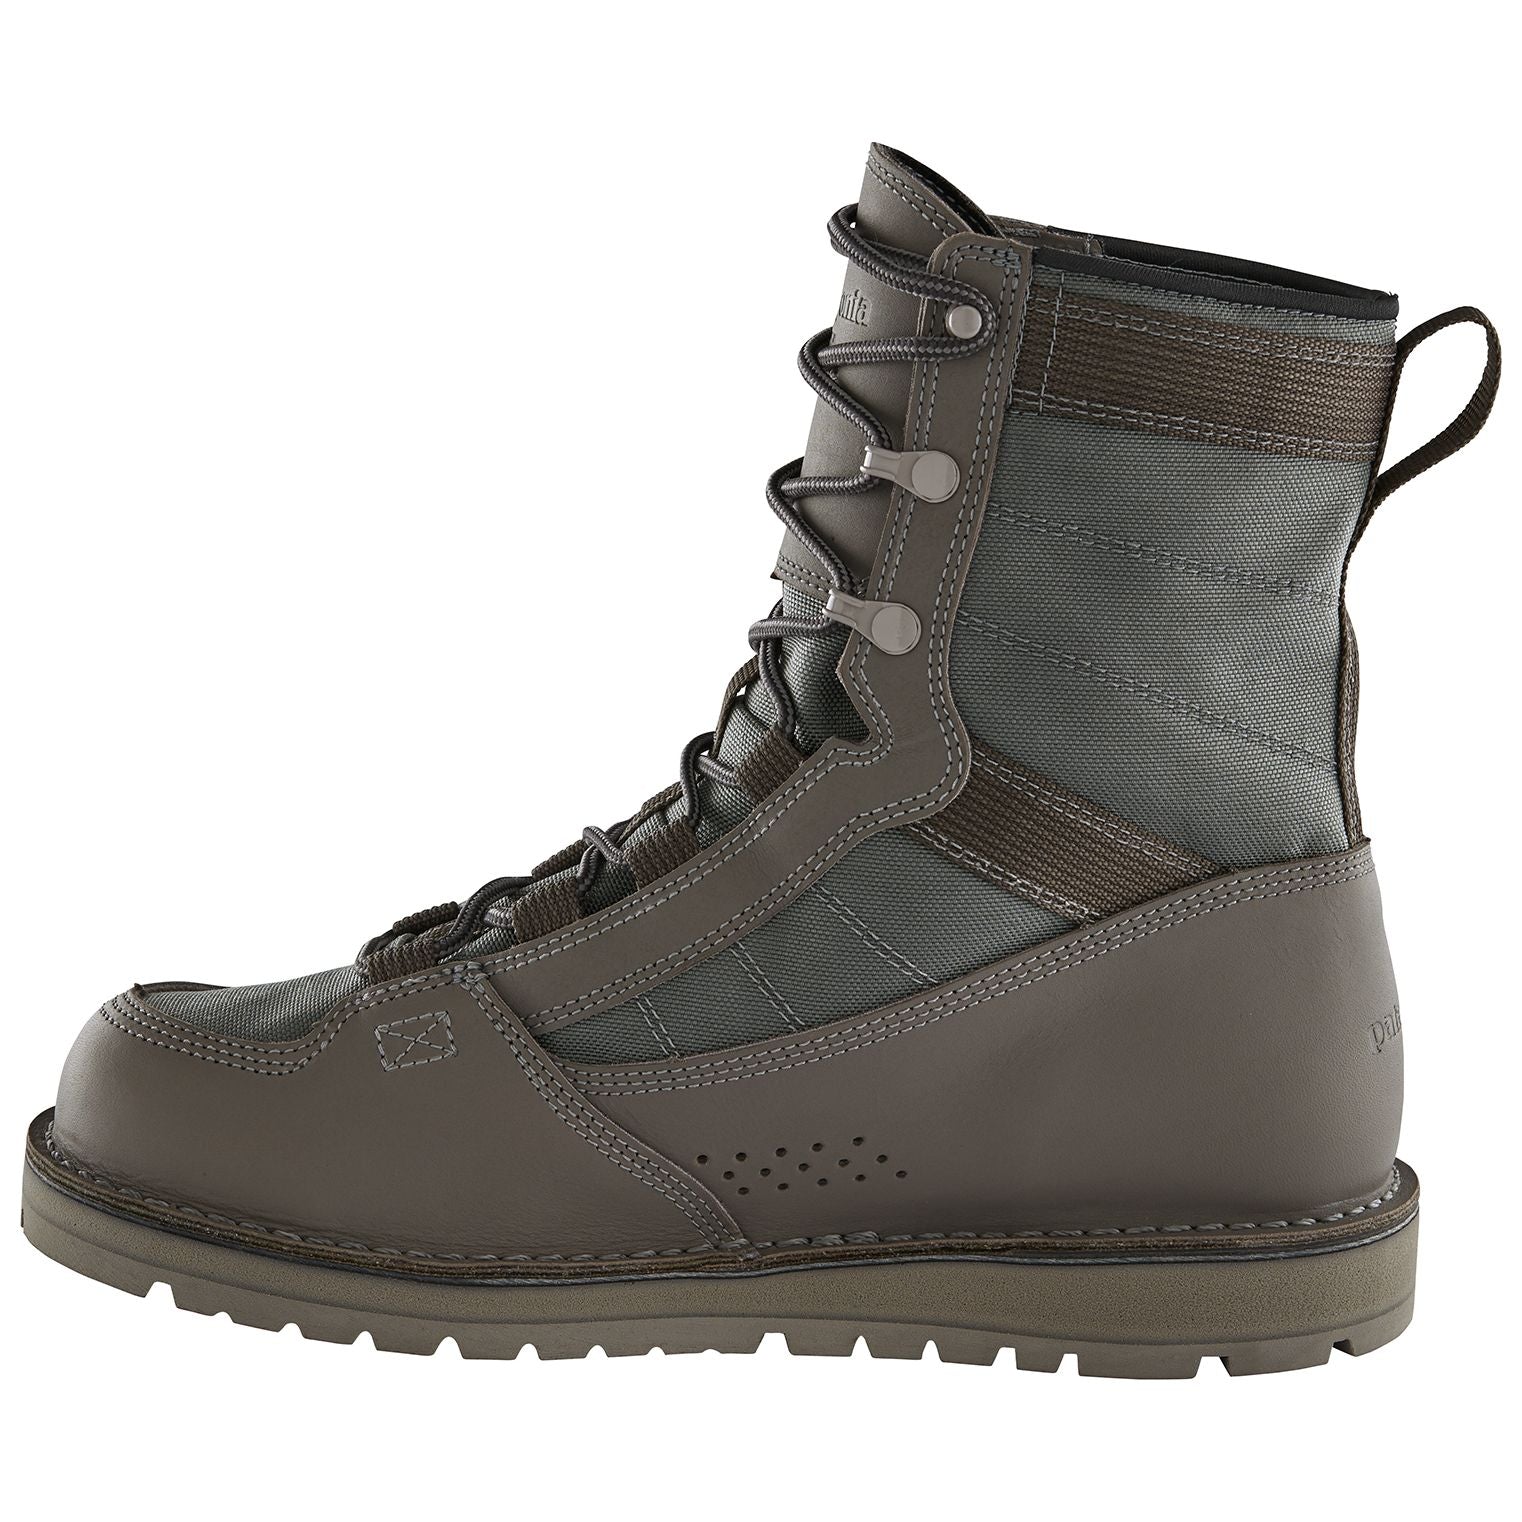 Patagonia River Salt Wading Boots Feather Grey Image 04